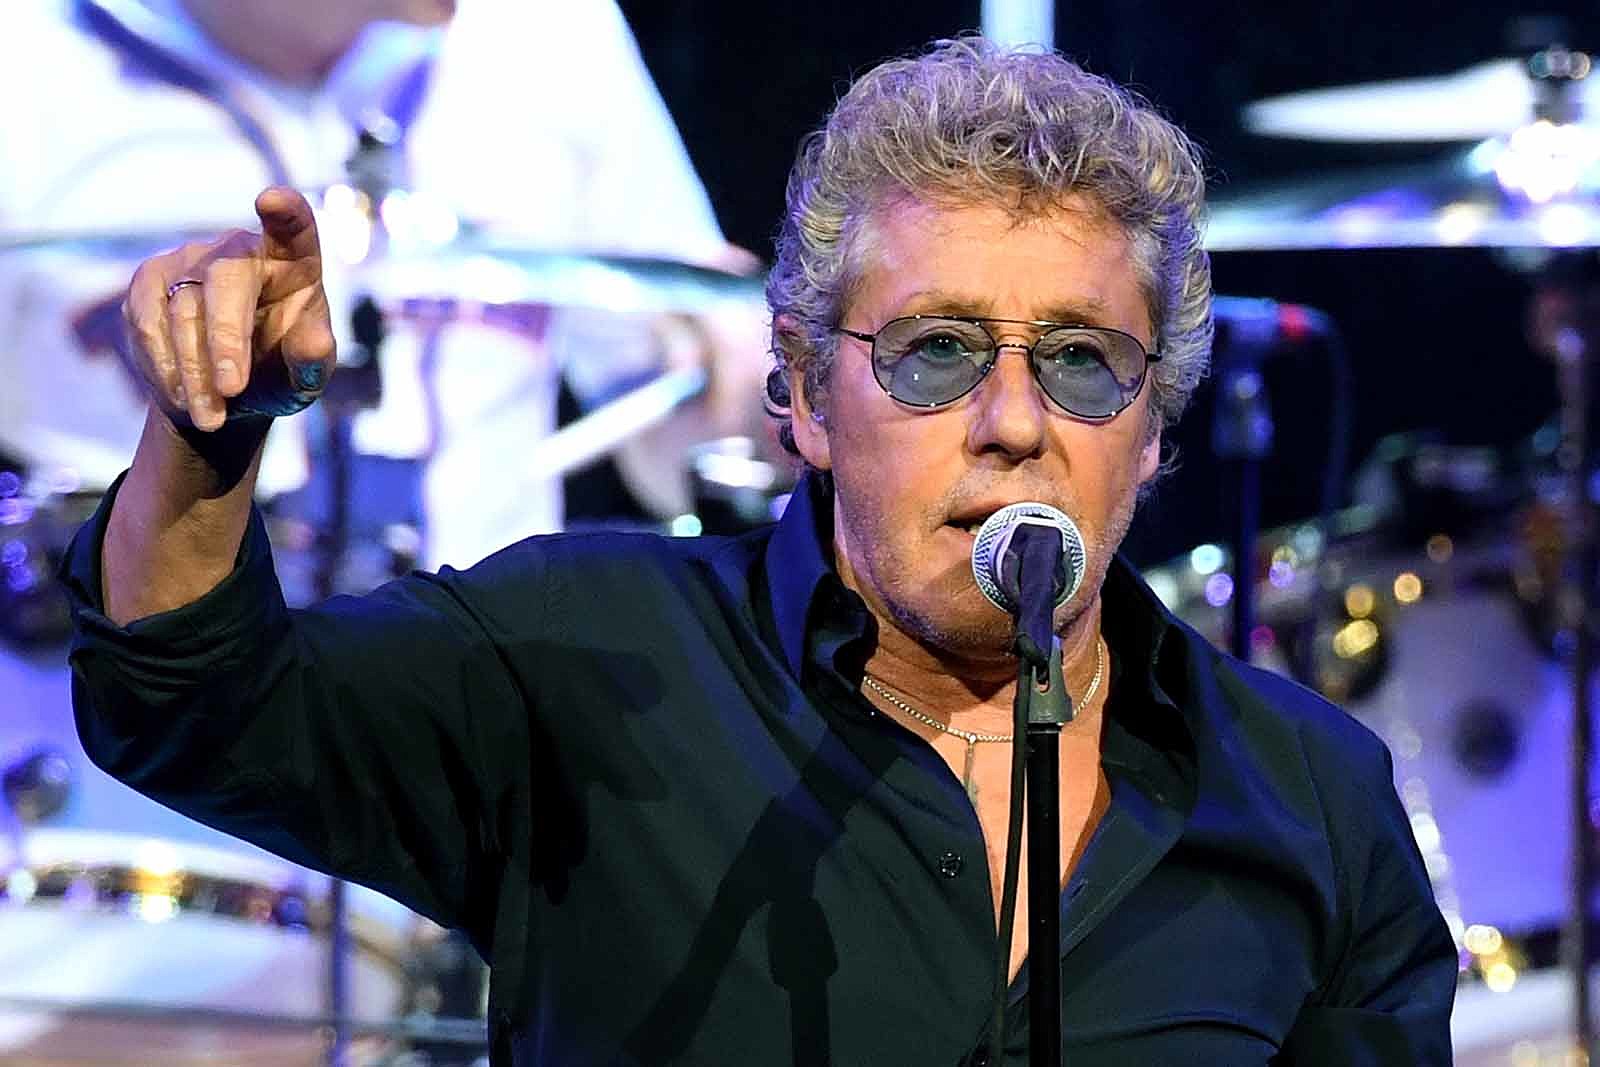 pictures of roger daltrey